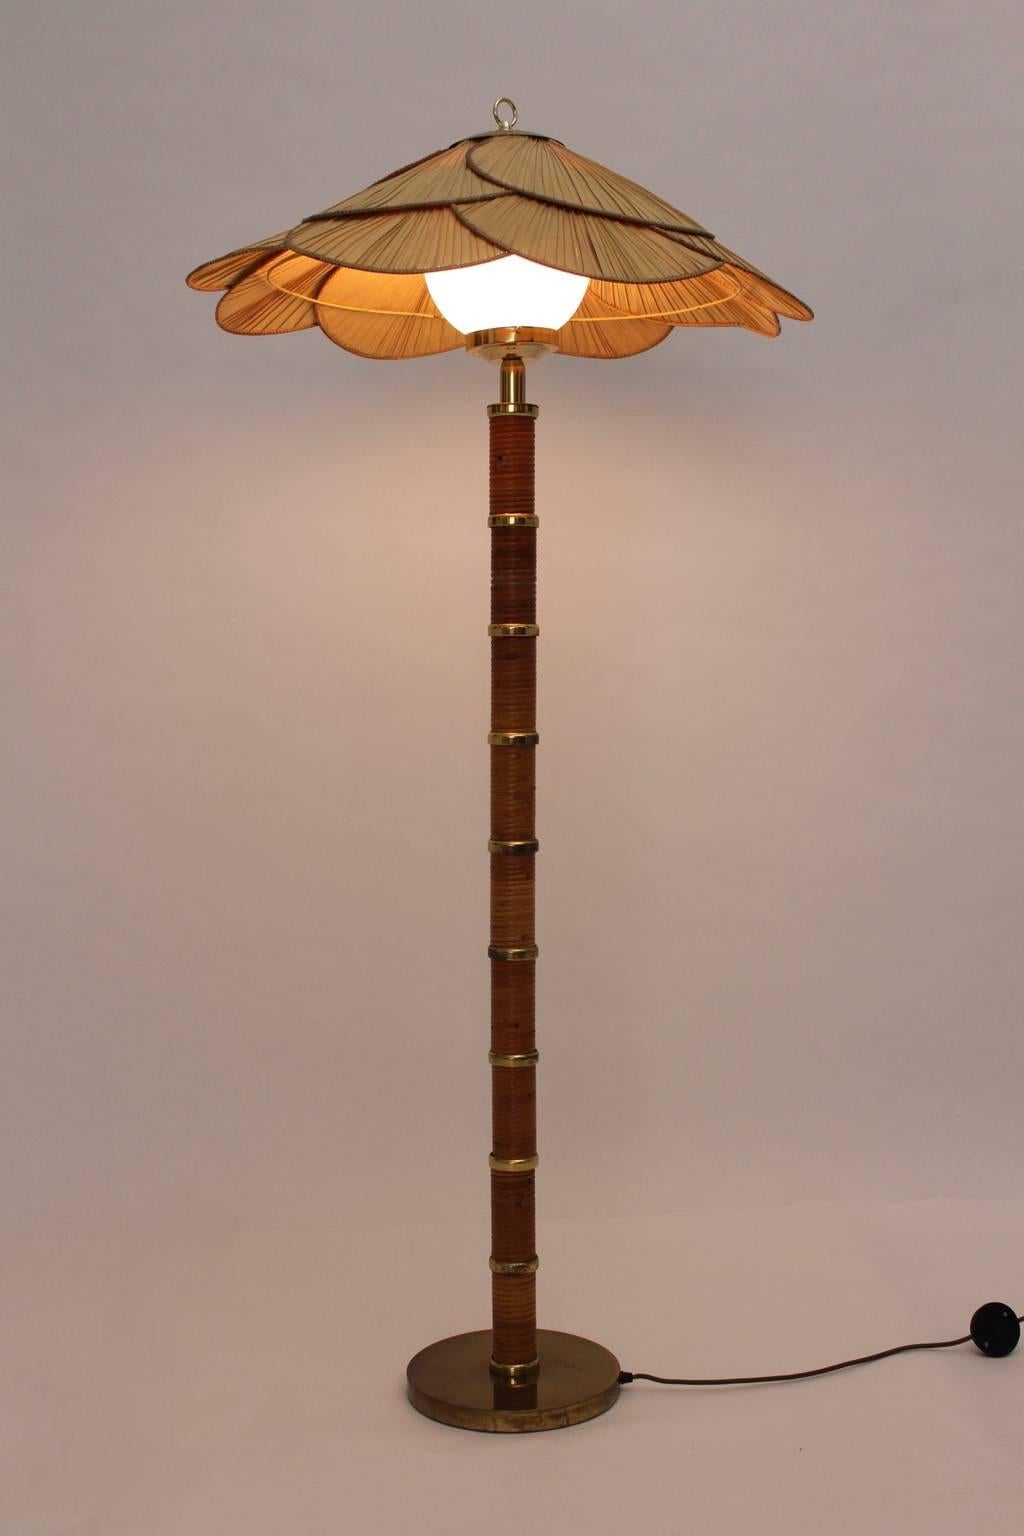 This very rare floor lamp was designed by Ingo Maurer, 1970s, Germany.
The materials are: rattan, brass, opal glass ball and exotic leaves.

The base is in very good condition with nice patina.
The lamp shade was made of exotic leaves and shows